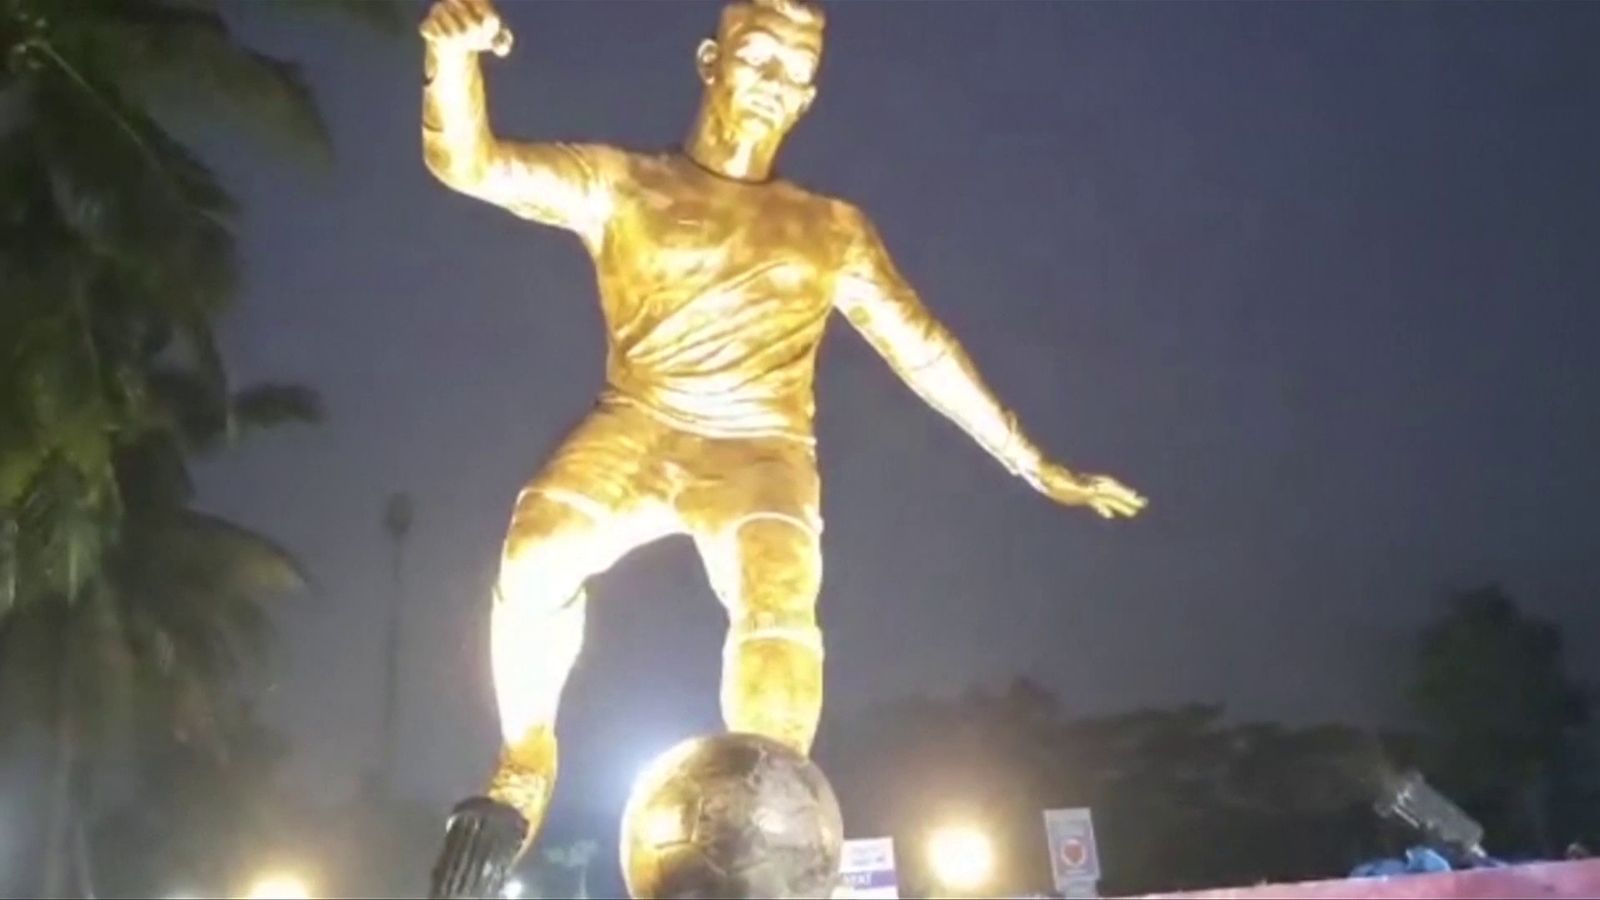 Cristiano Ronaldo: Statue of Man Utd and Portugal forward unveiled in Goa,  India in bid to 'inspire next generation' | Football News | Sky Sports